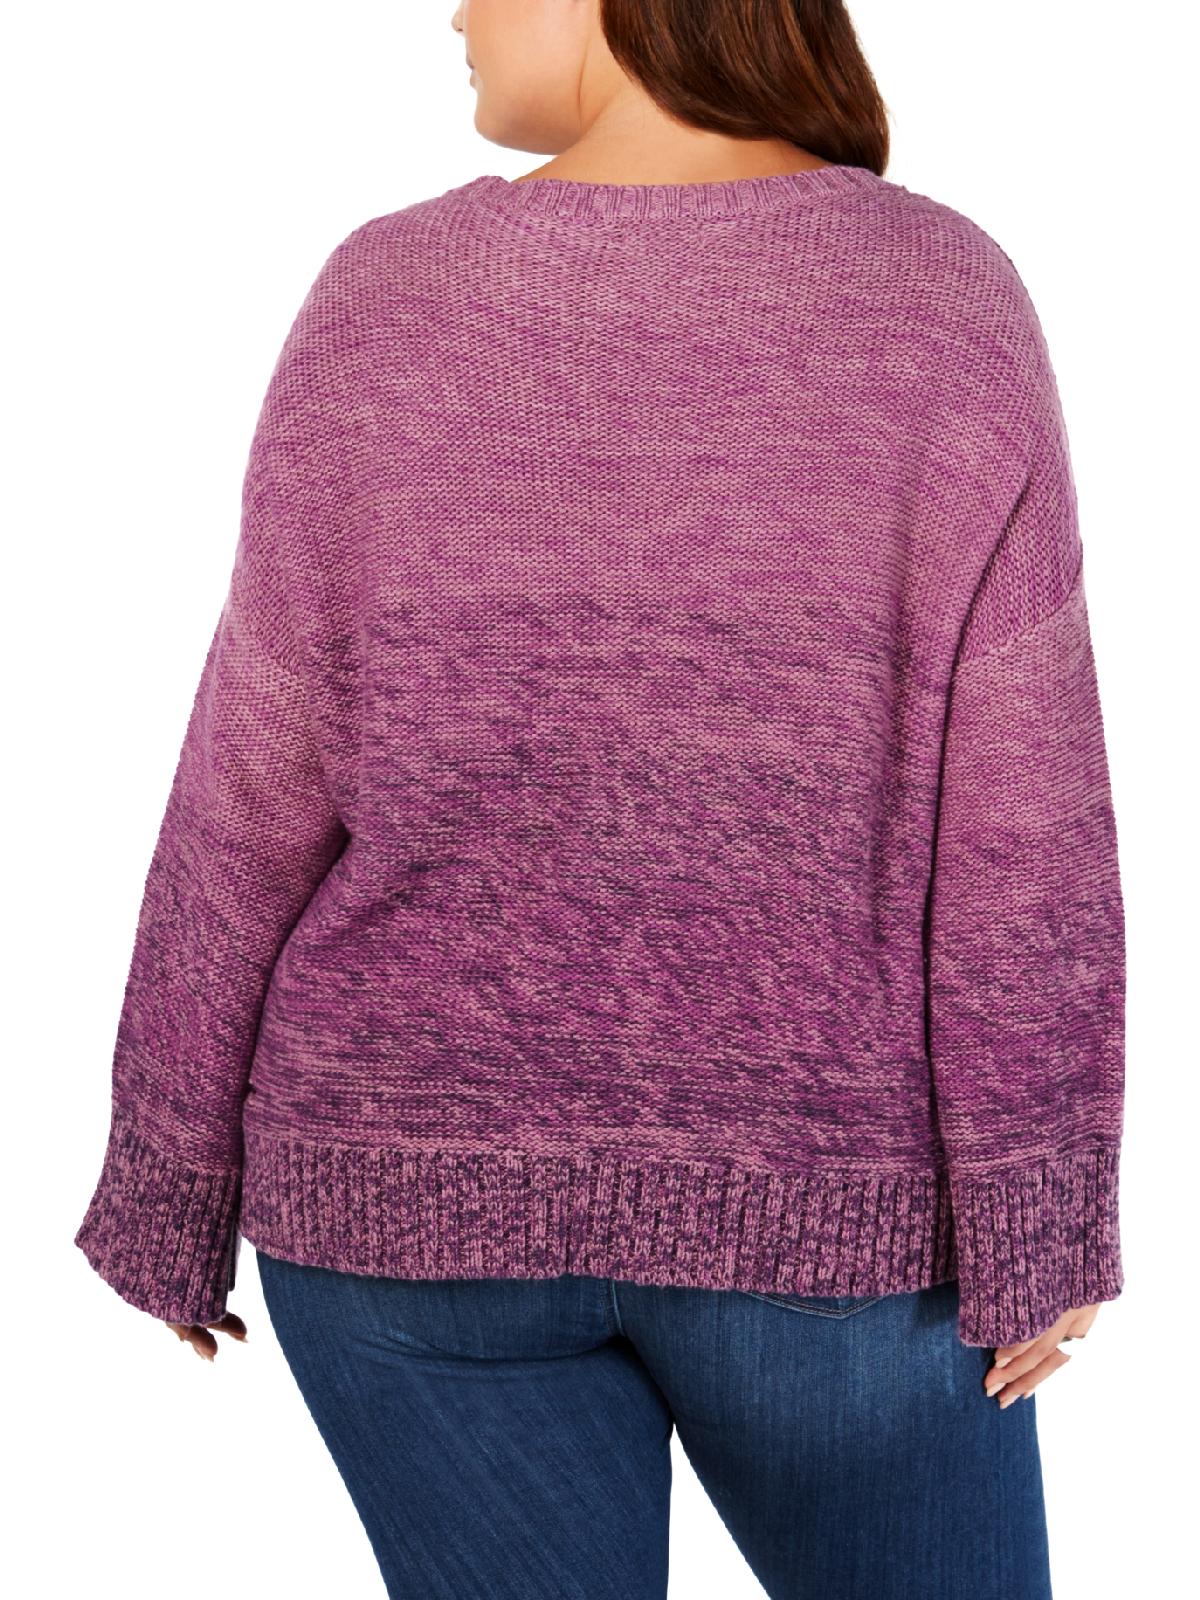 Style & Co. Womens Marl Braid Pullover Sweater, Purple, 3X - image 2 of 2